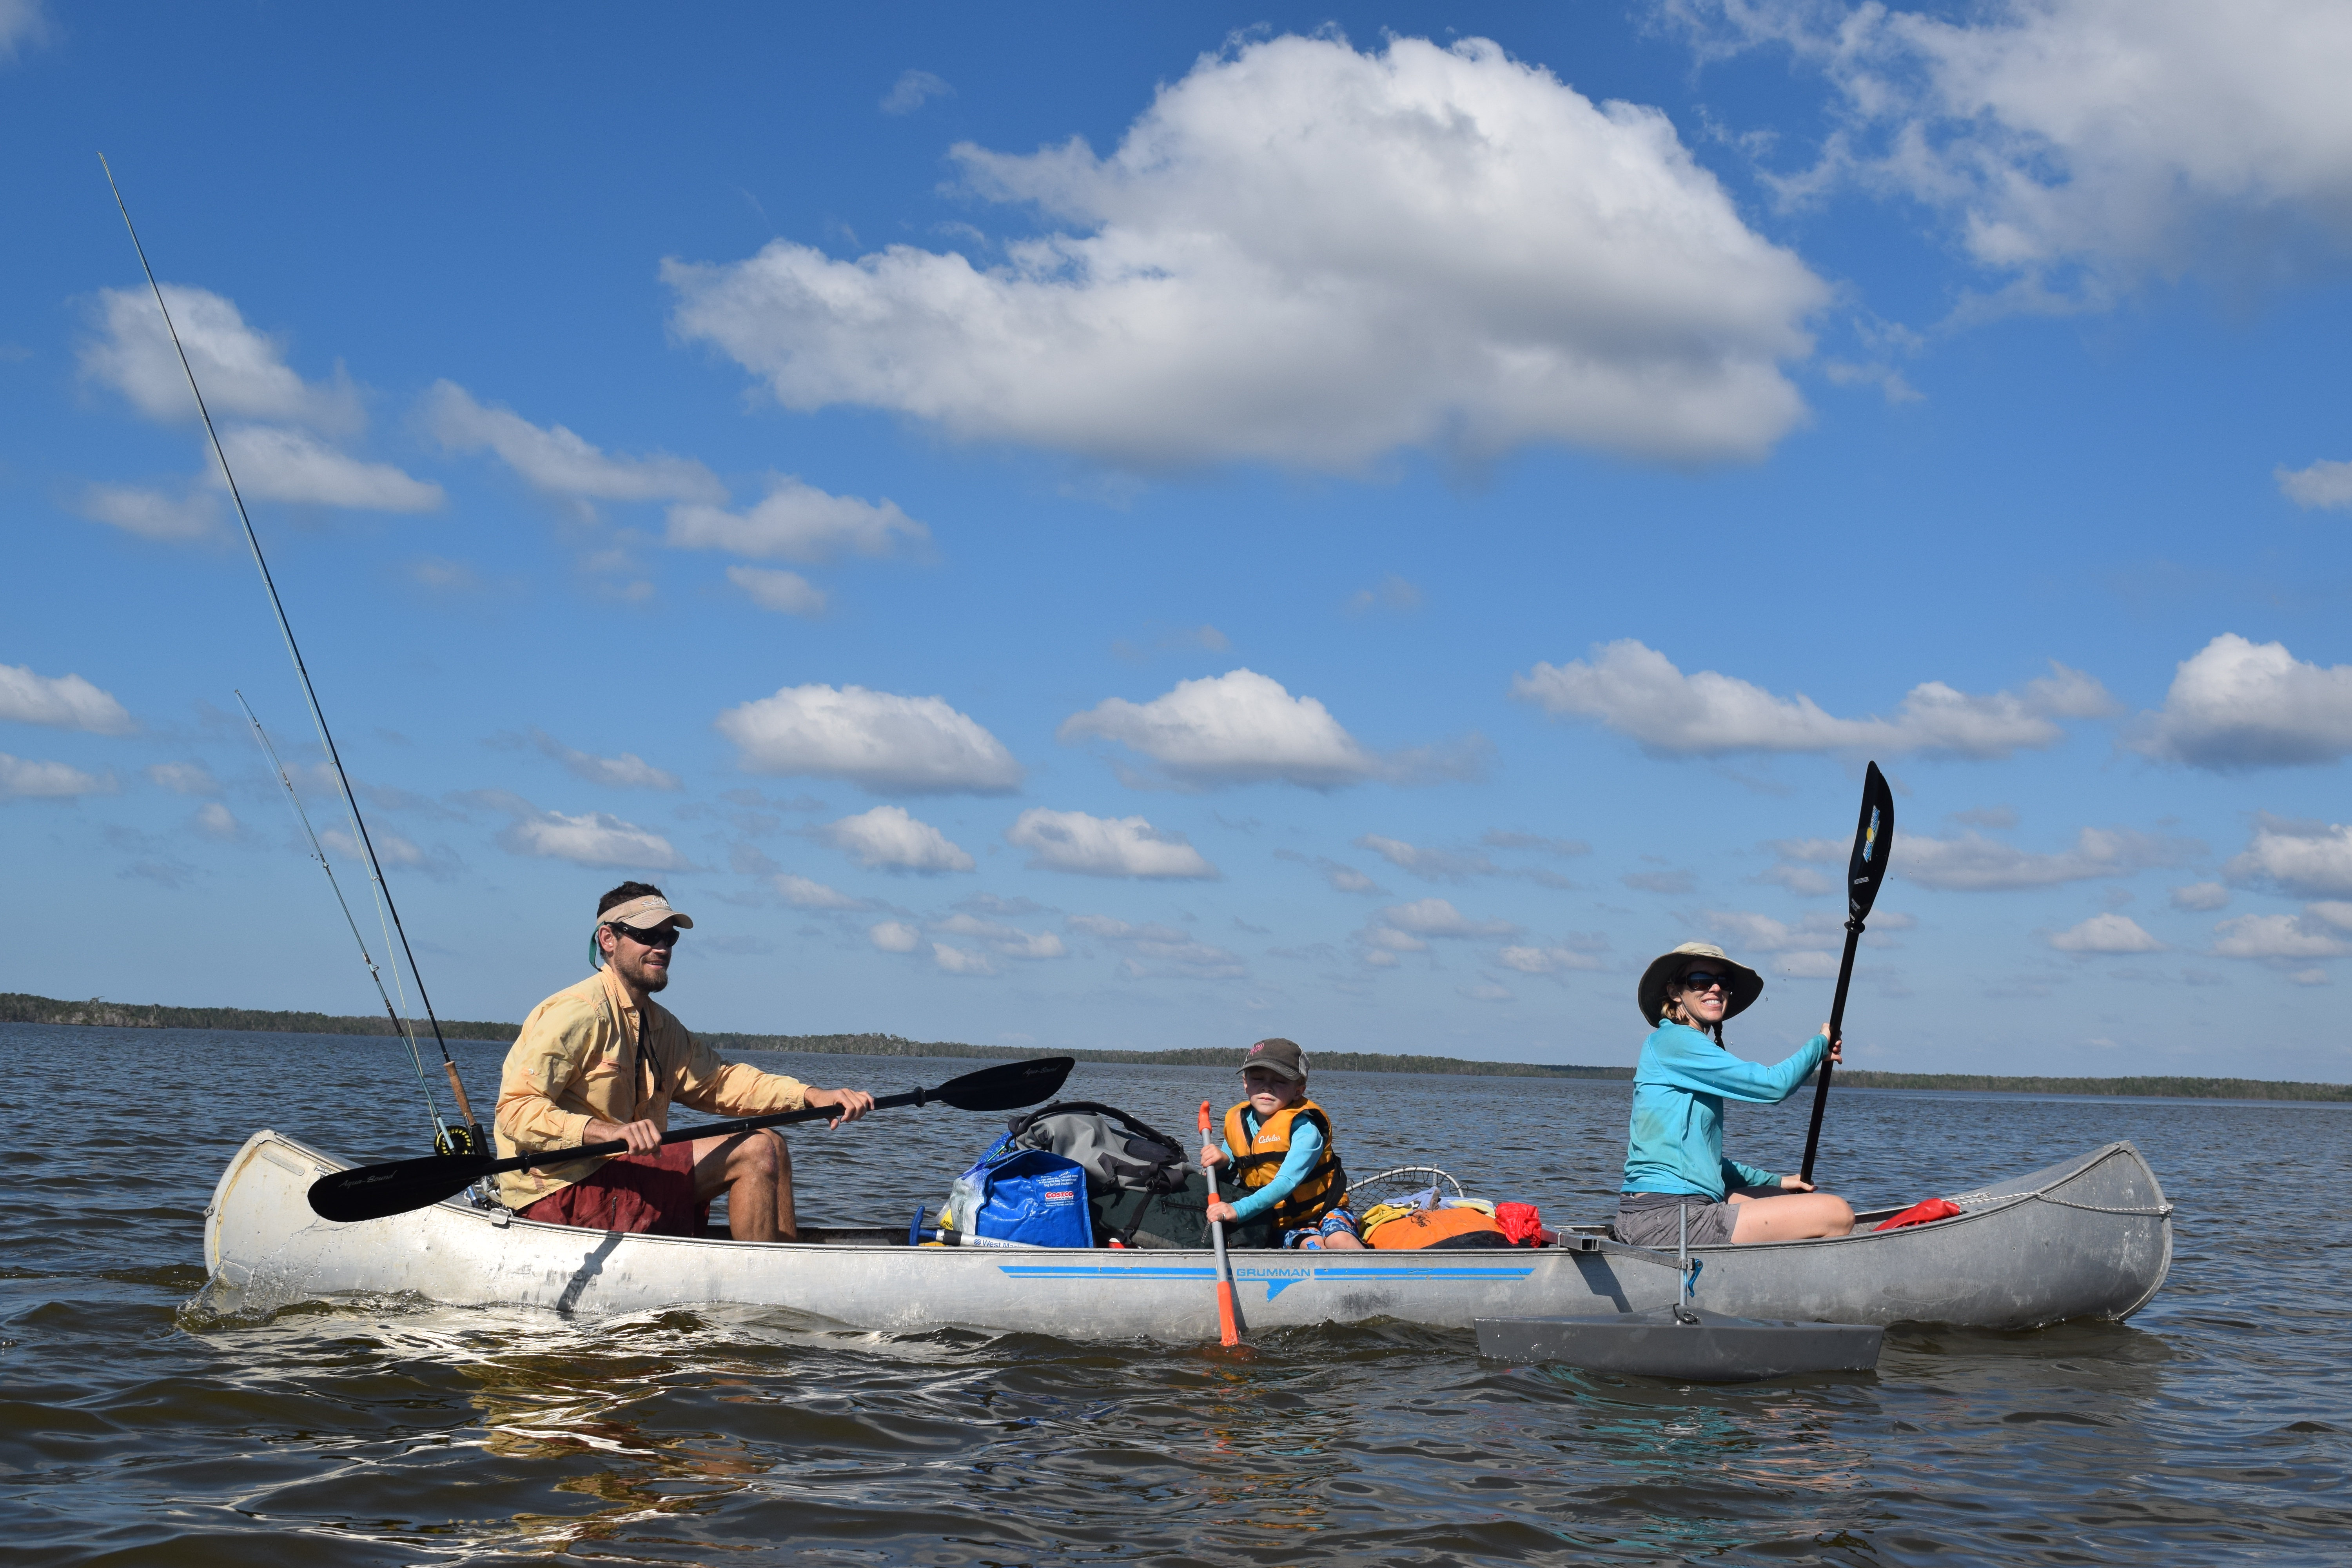 randall roberts - adventure family canoes the everglades in florida